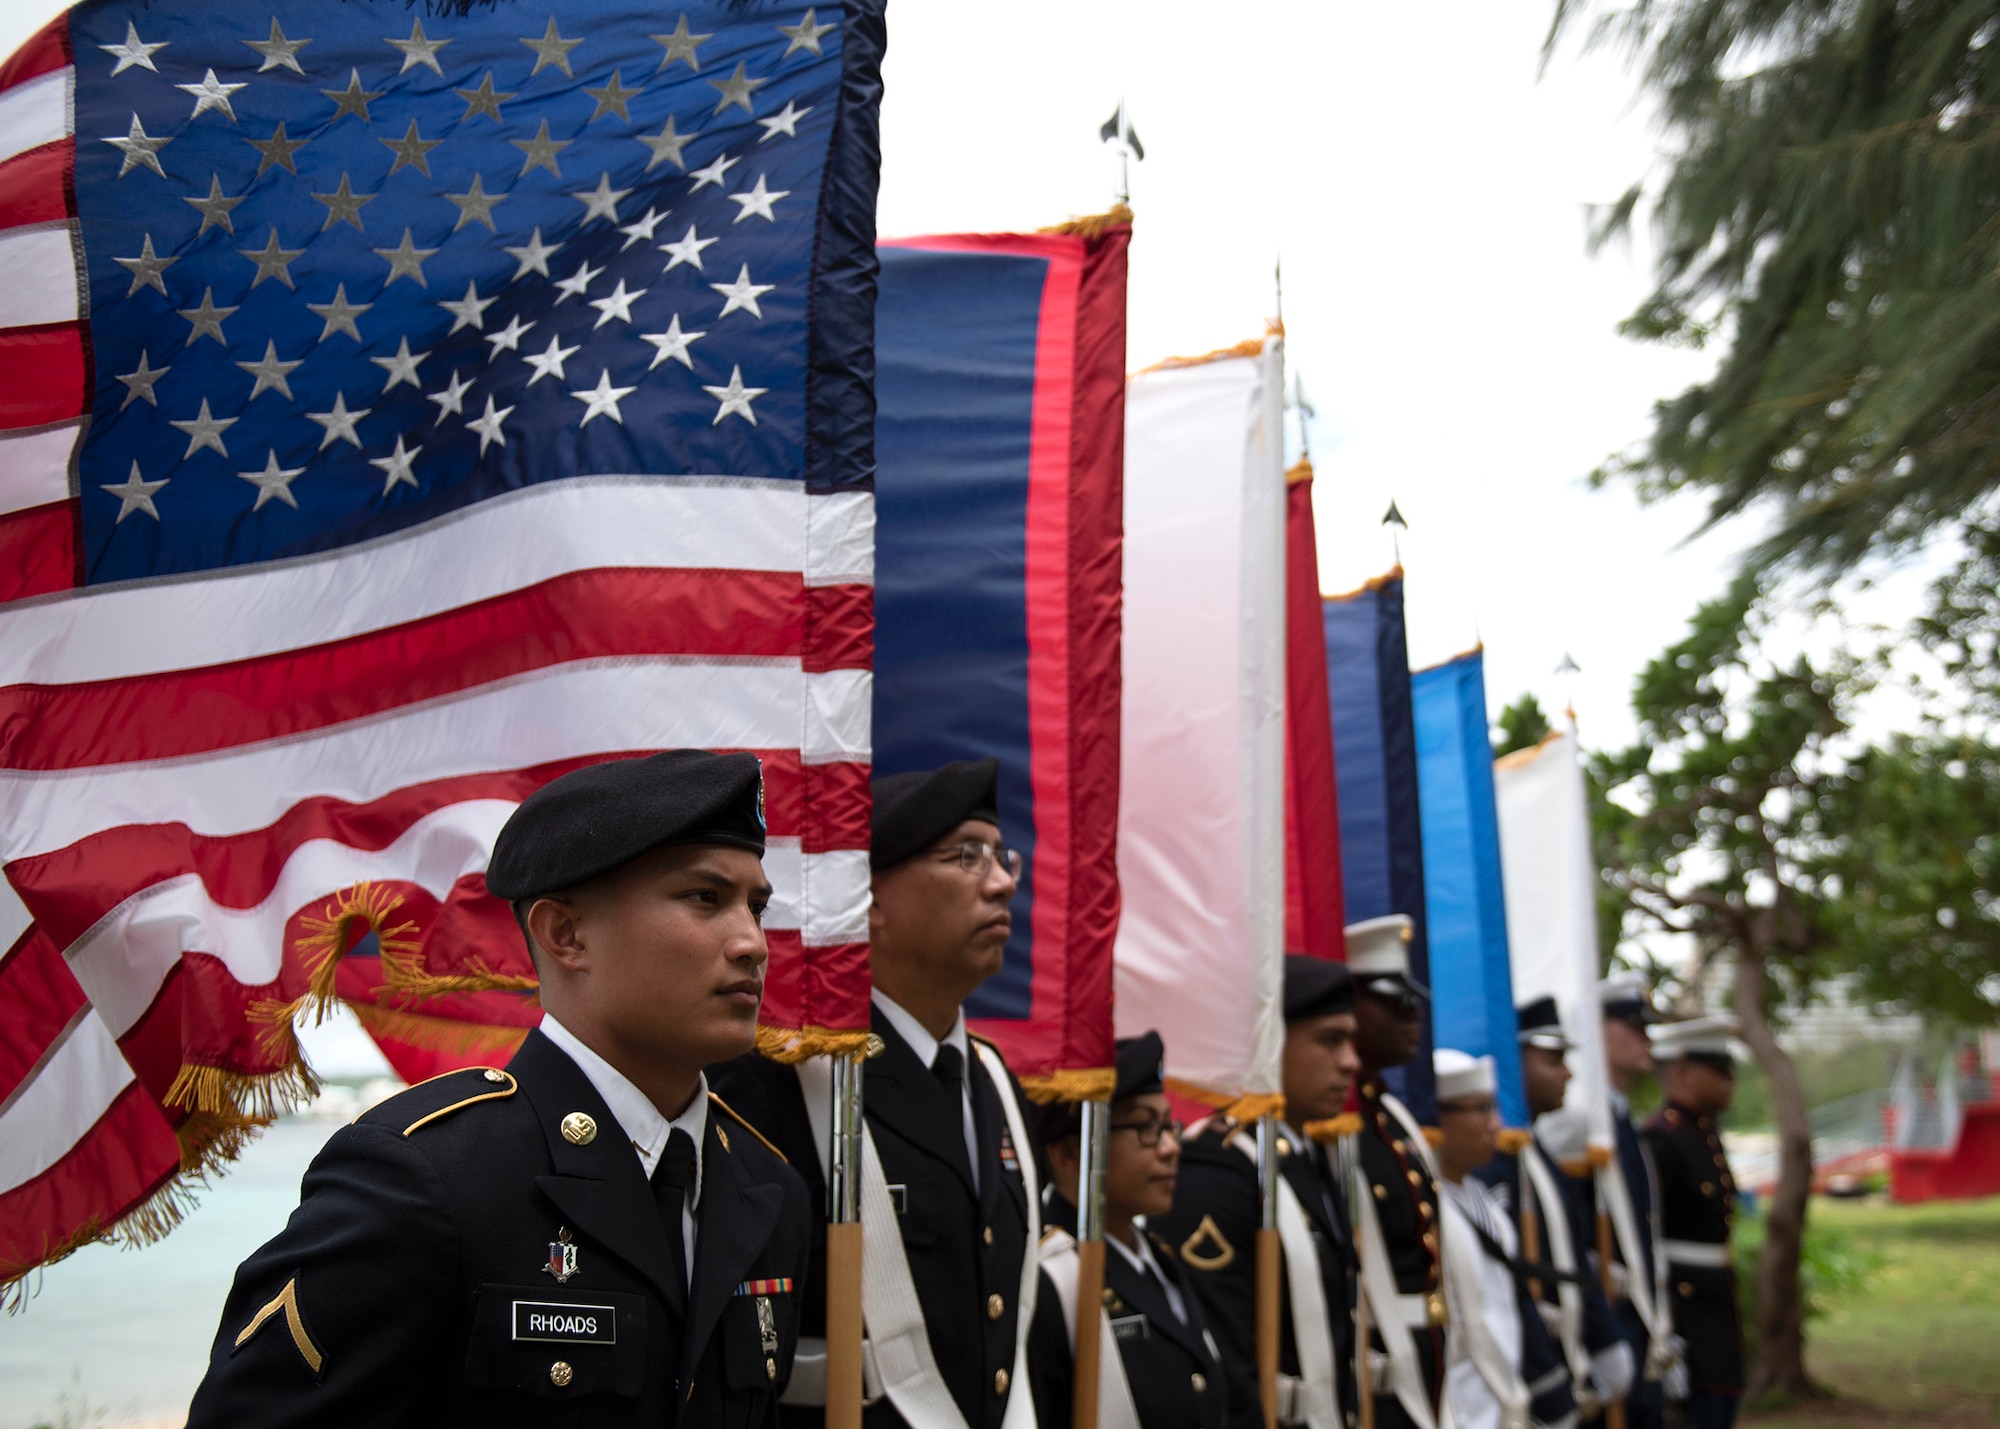 Members of the U.S. Joint Color Guard stand in formation prior to the start of the Veterans Day Ceremony Nov. 11, 2019 at Ypao Beach, Guam. The Veterans Day ceremony celebrated the service of all U.S. military veterans and coincides with Armistice Day and Remembrance Day which are celebrated in other countries, marking the anniversary of the end of World War I.